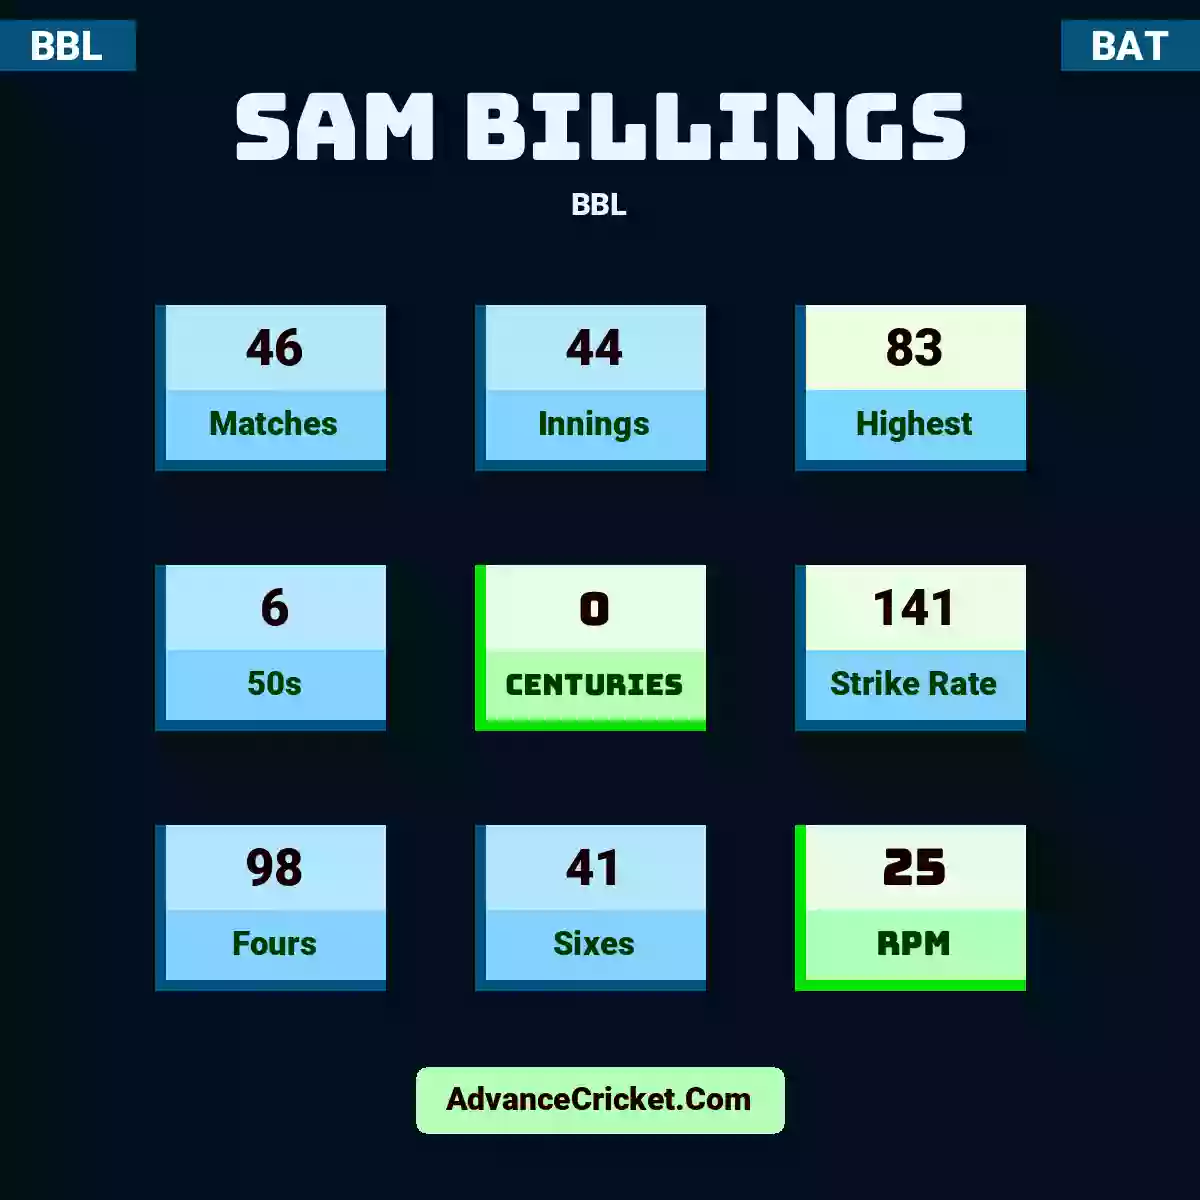 Sam Billings BBL , Sam Billings played 46 matches, scored 83 runs as highest, 6 half-centuries, and 0 centuries, with a strike rate of 141. S.Billings hit 98 fours and 41 sixes, with an RPM of 25.